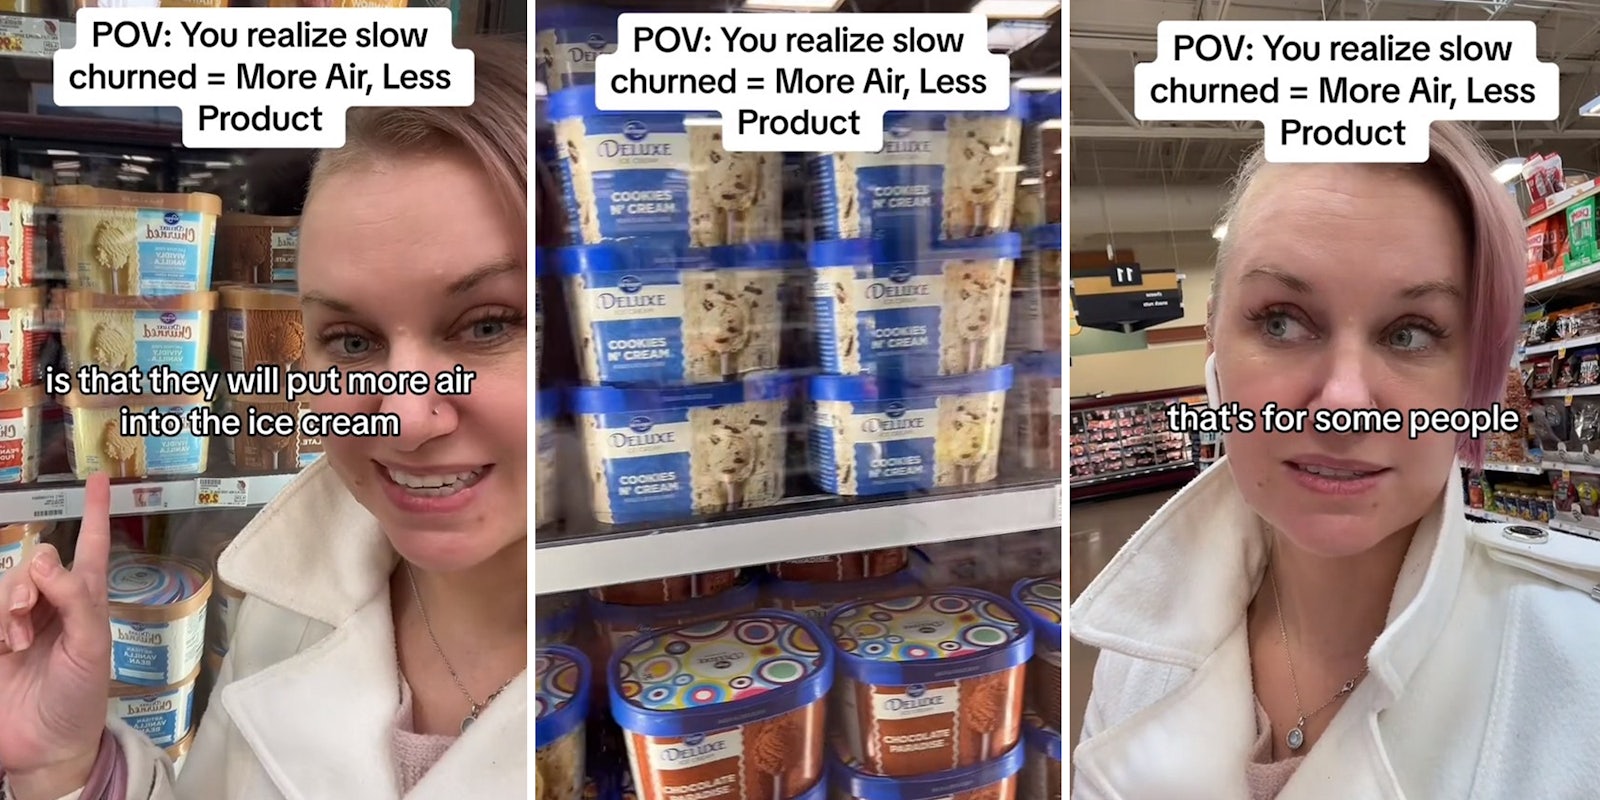 Grocery shopper reveals how ‘slow-churned’ ice cream tricks customers